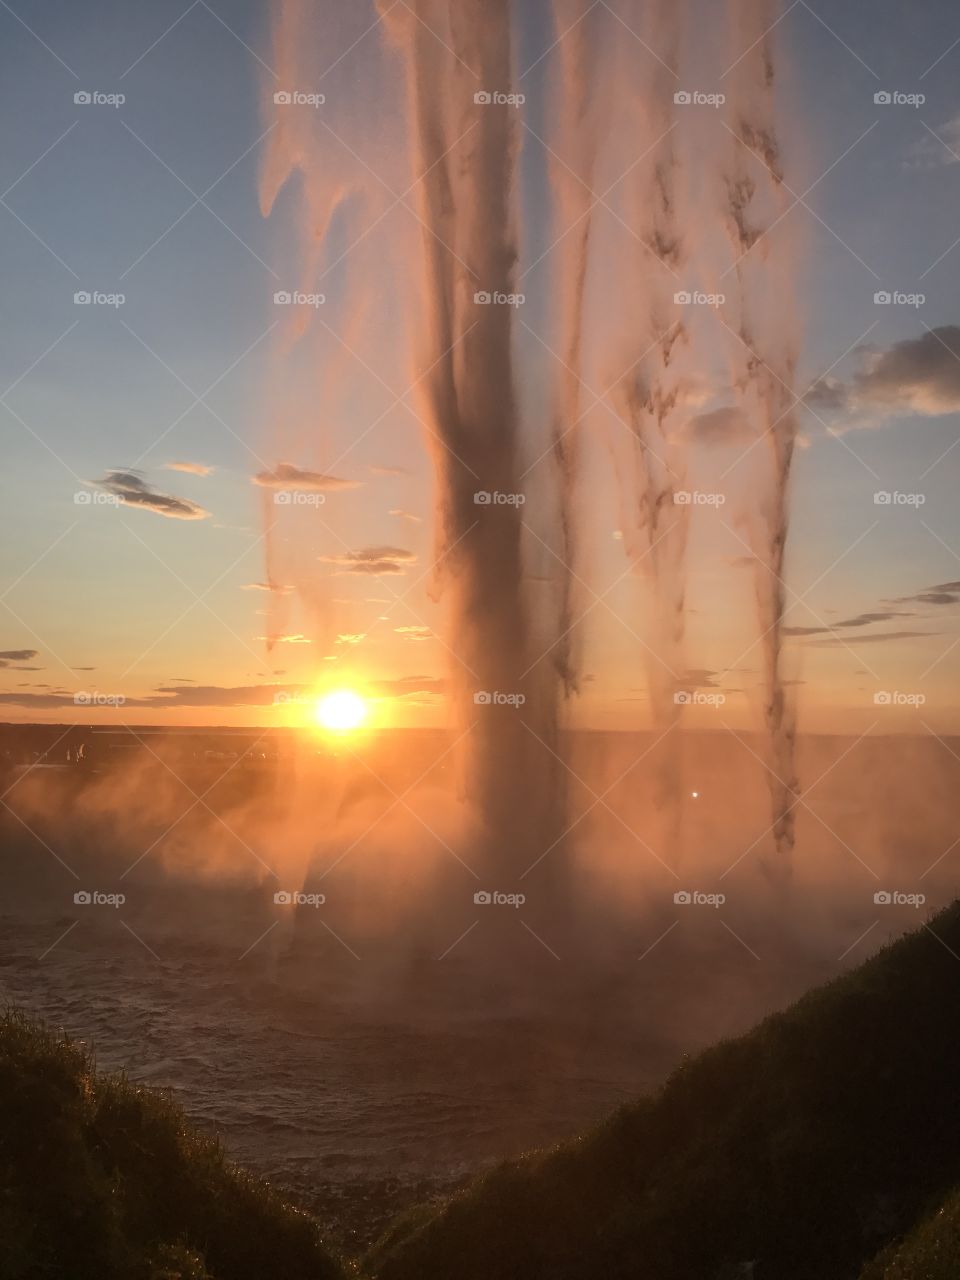 View from inside the waterfall at sunset